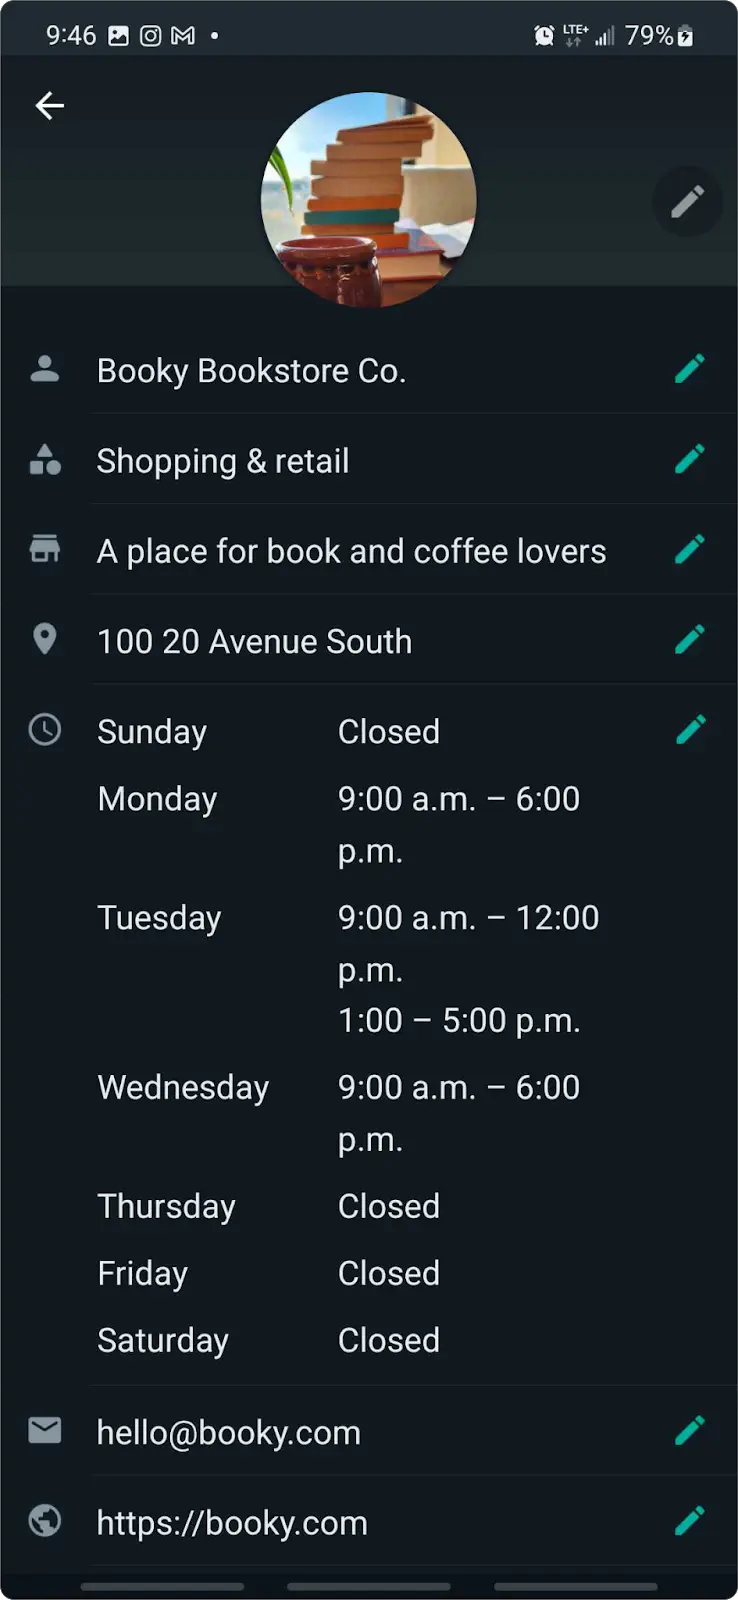 Detailed overview of business hours.